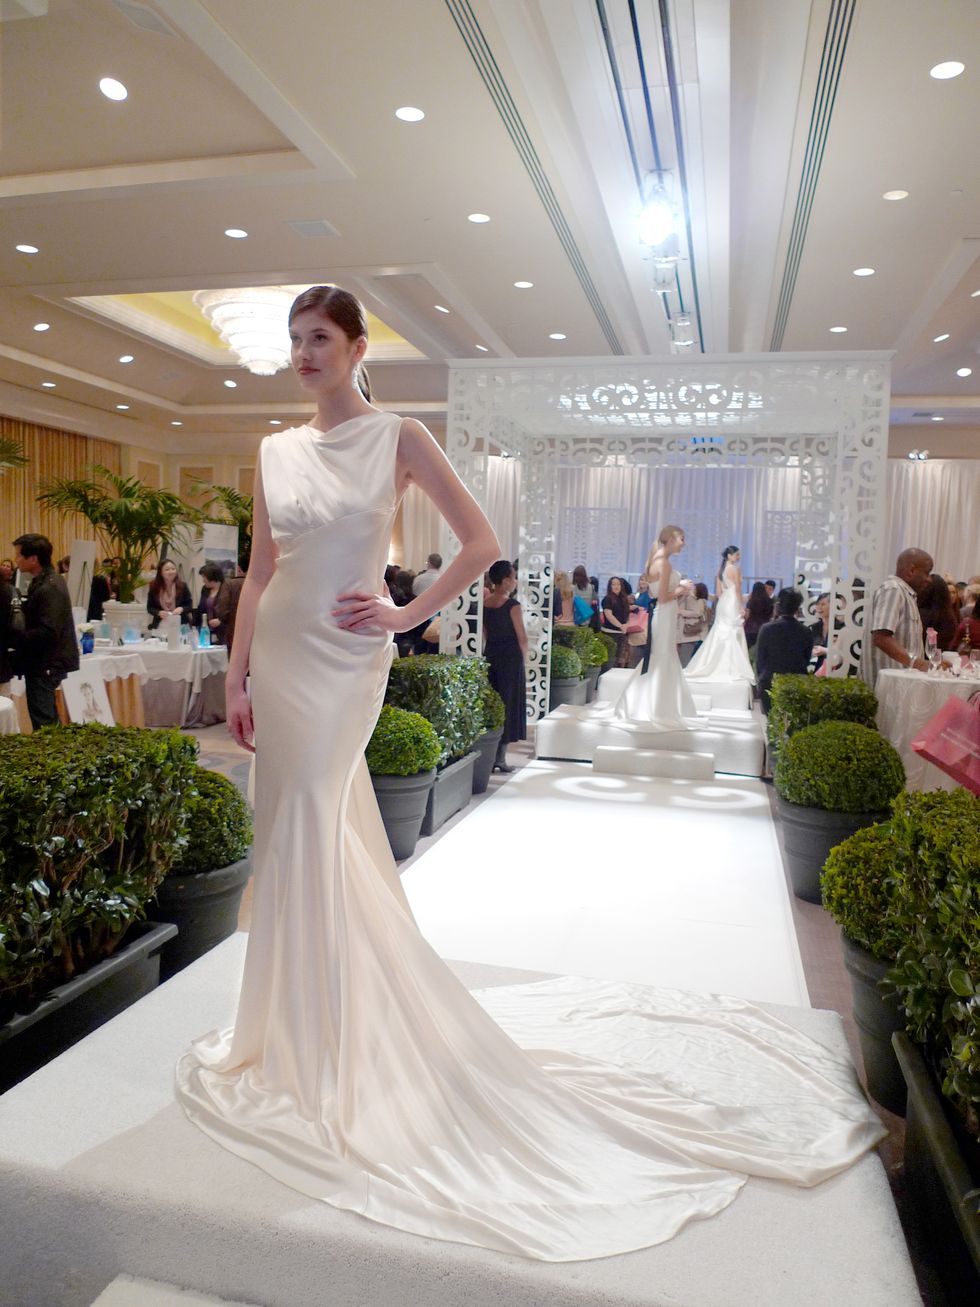 Don't Miss the VIP Lounge and Bridal Brunch at the Four Seasons San Francisco!